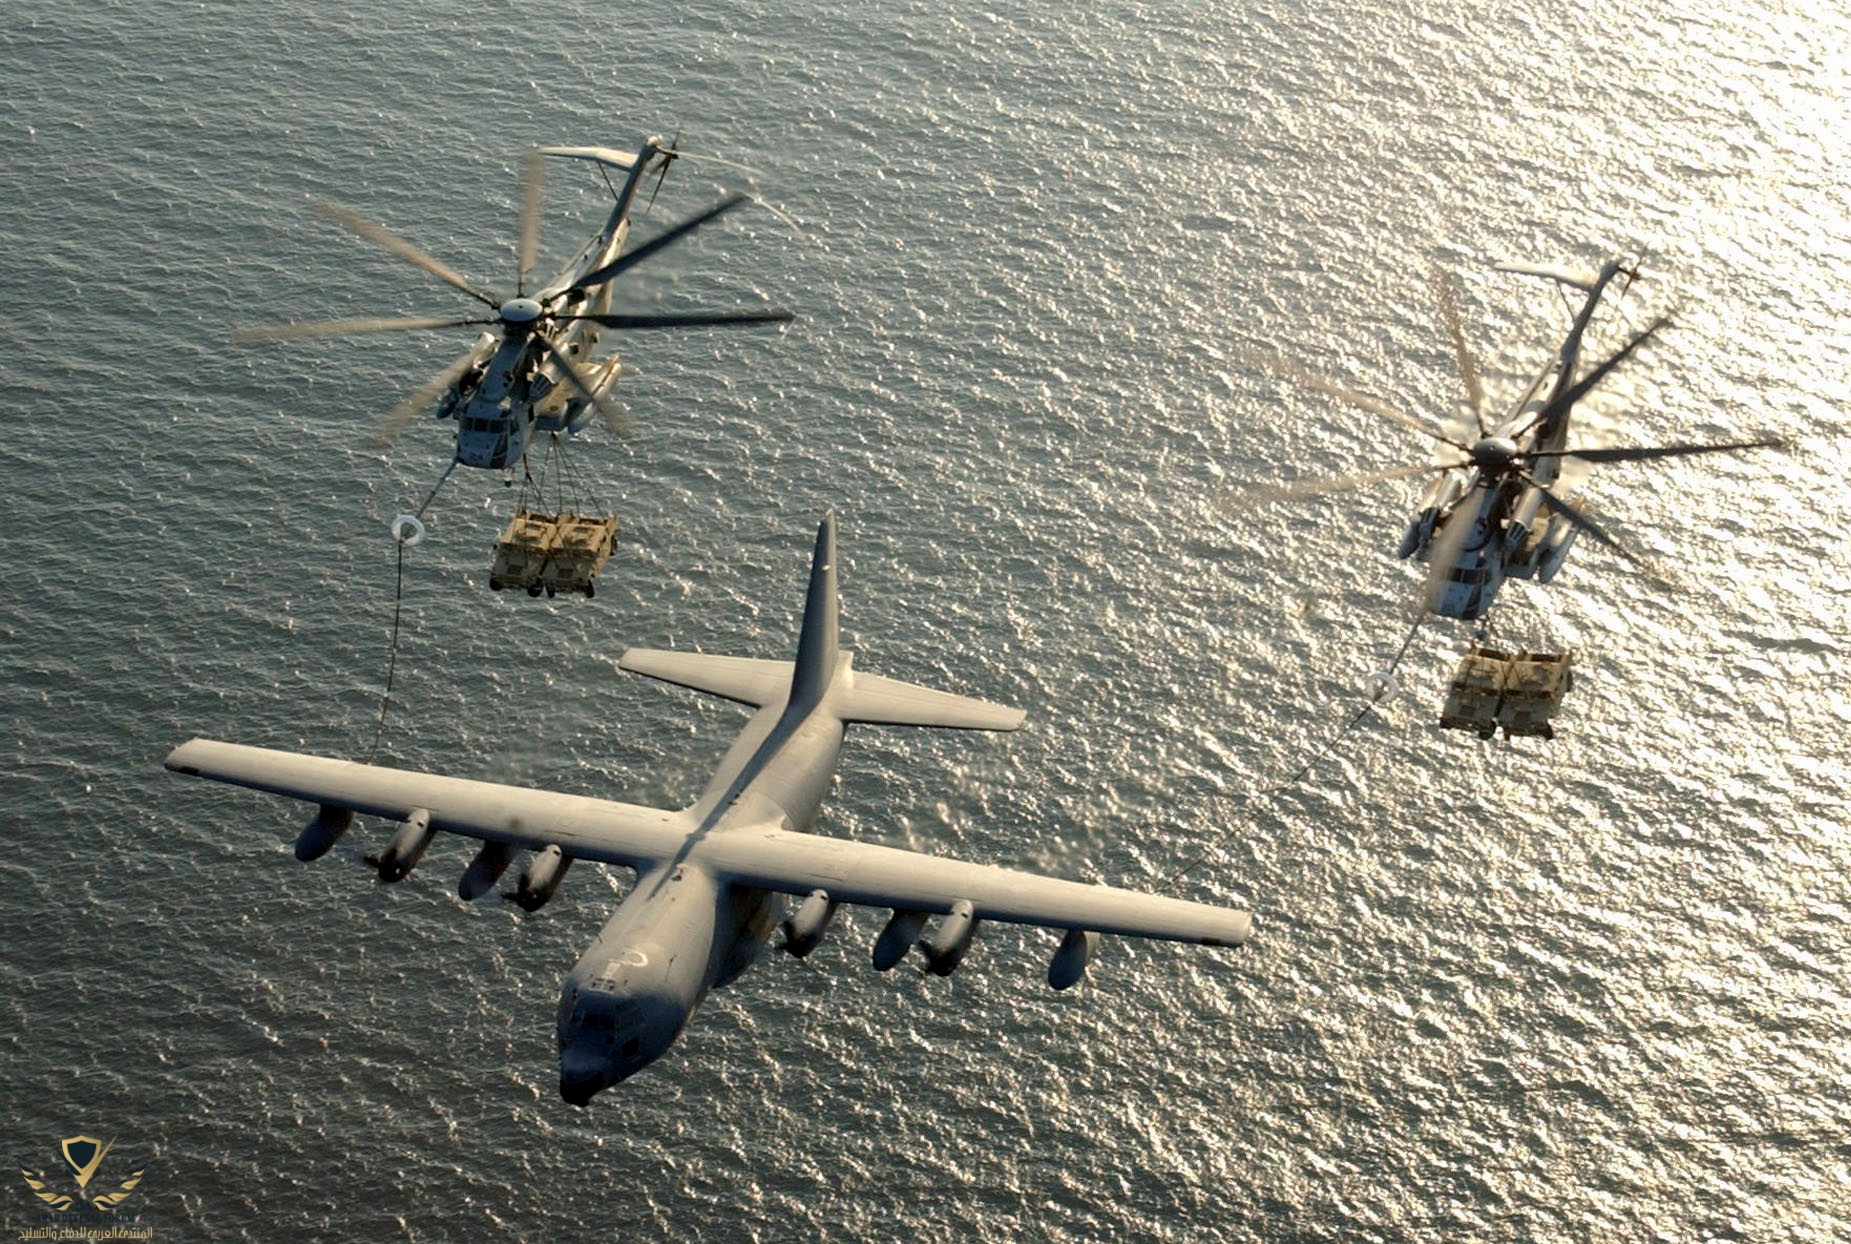 US_Navy_030130-M-0000X-001_Two_U.S._Marine_Corps_CH-53E_Super_Stallion_helicopters_assigned_to...jpg